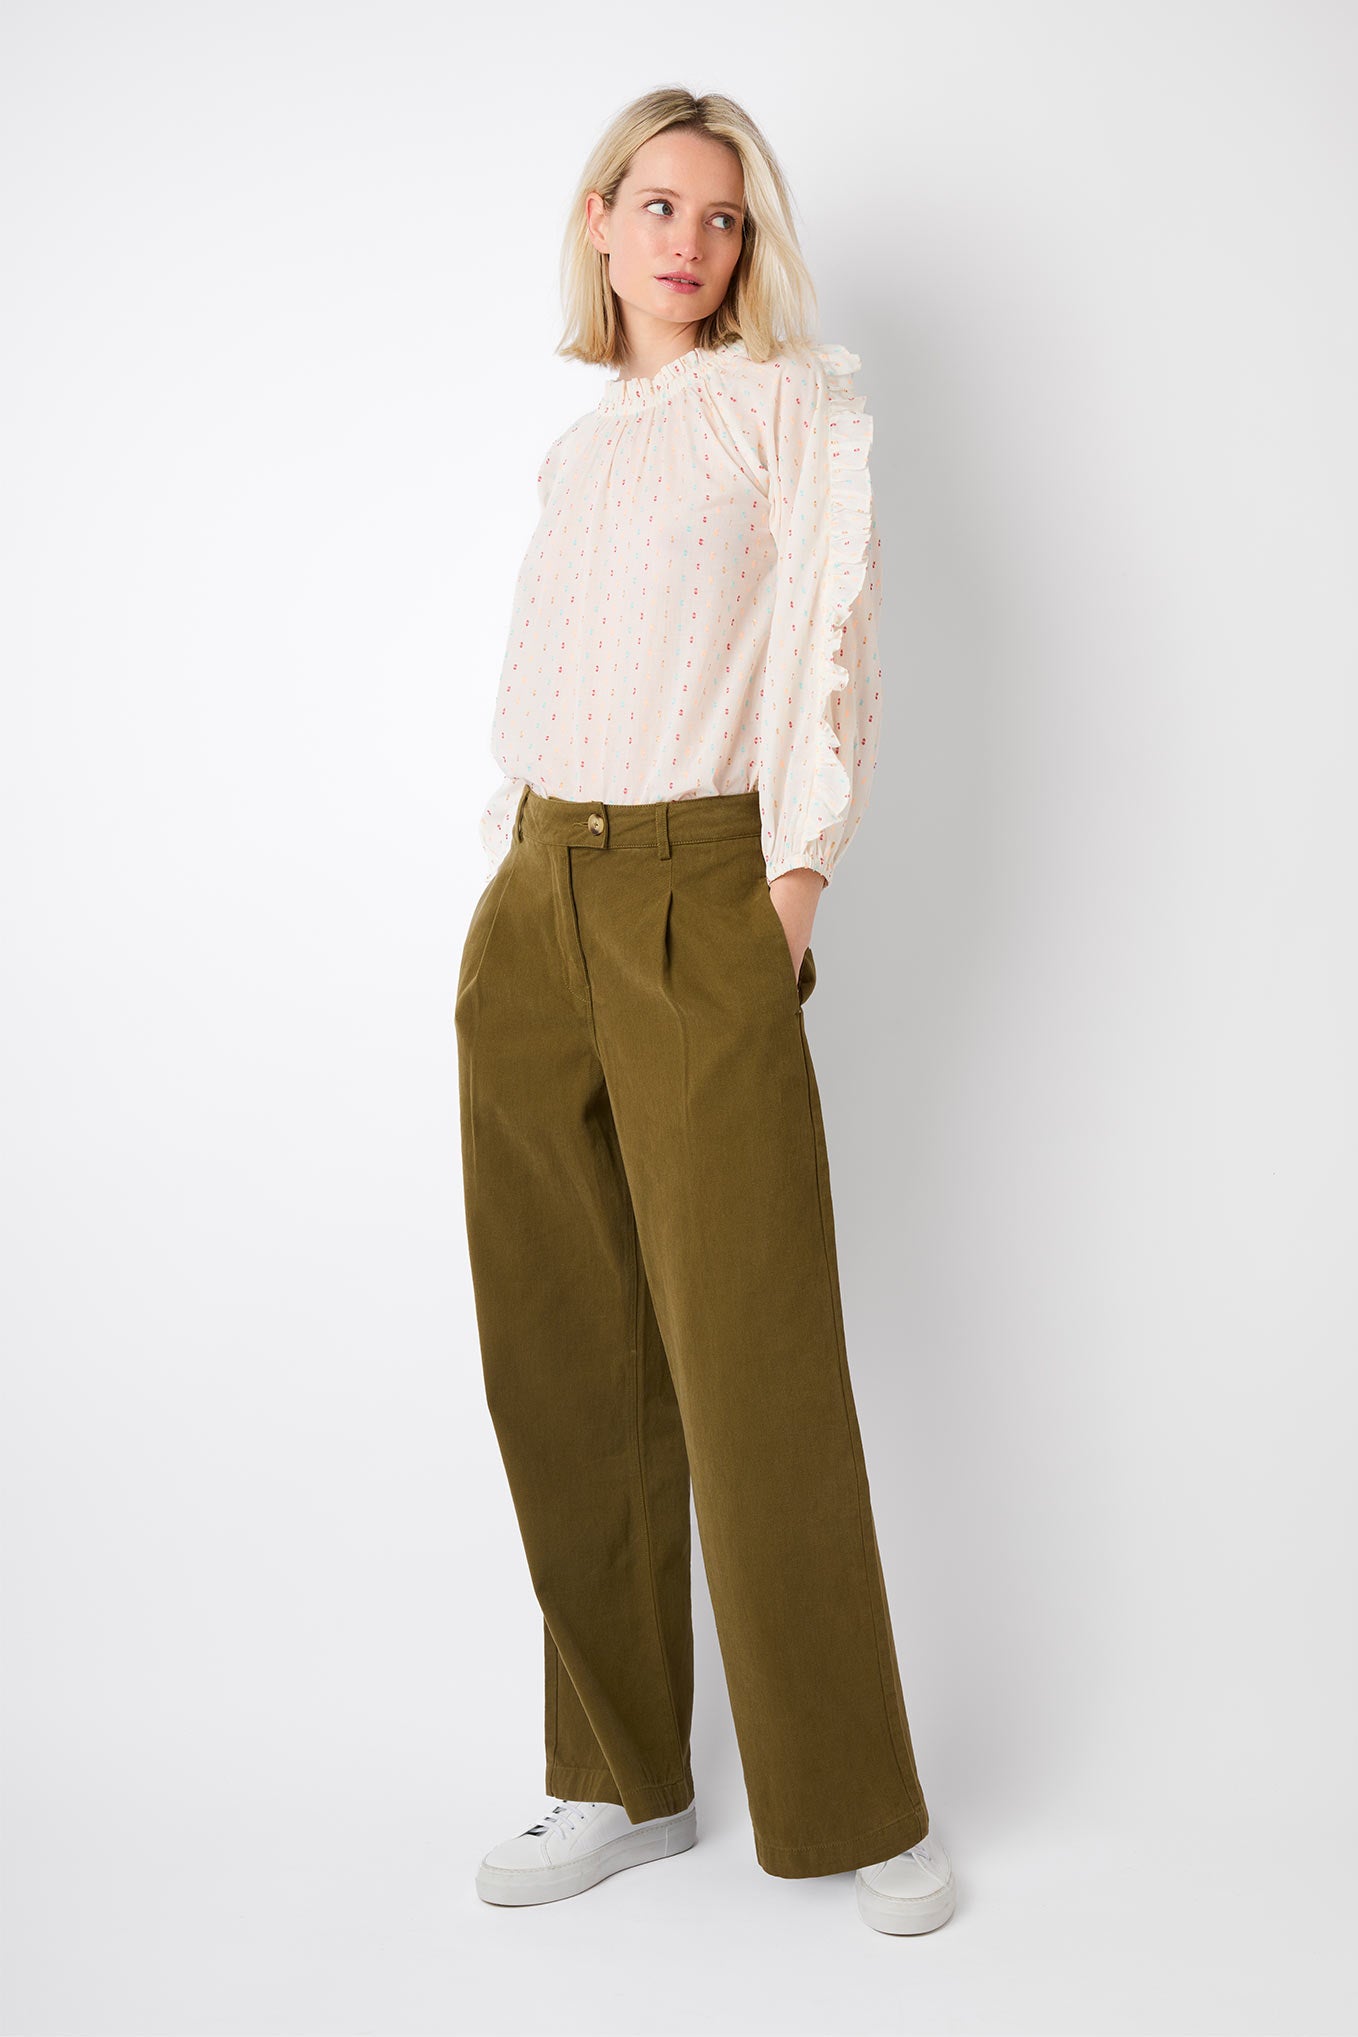 5837 Mango Trousers Stock Photos HighRes Pictures and Images  Getty  Images